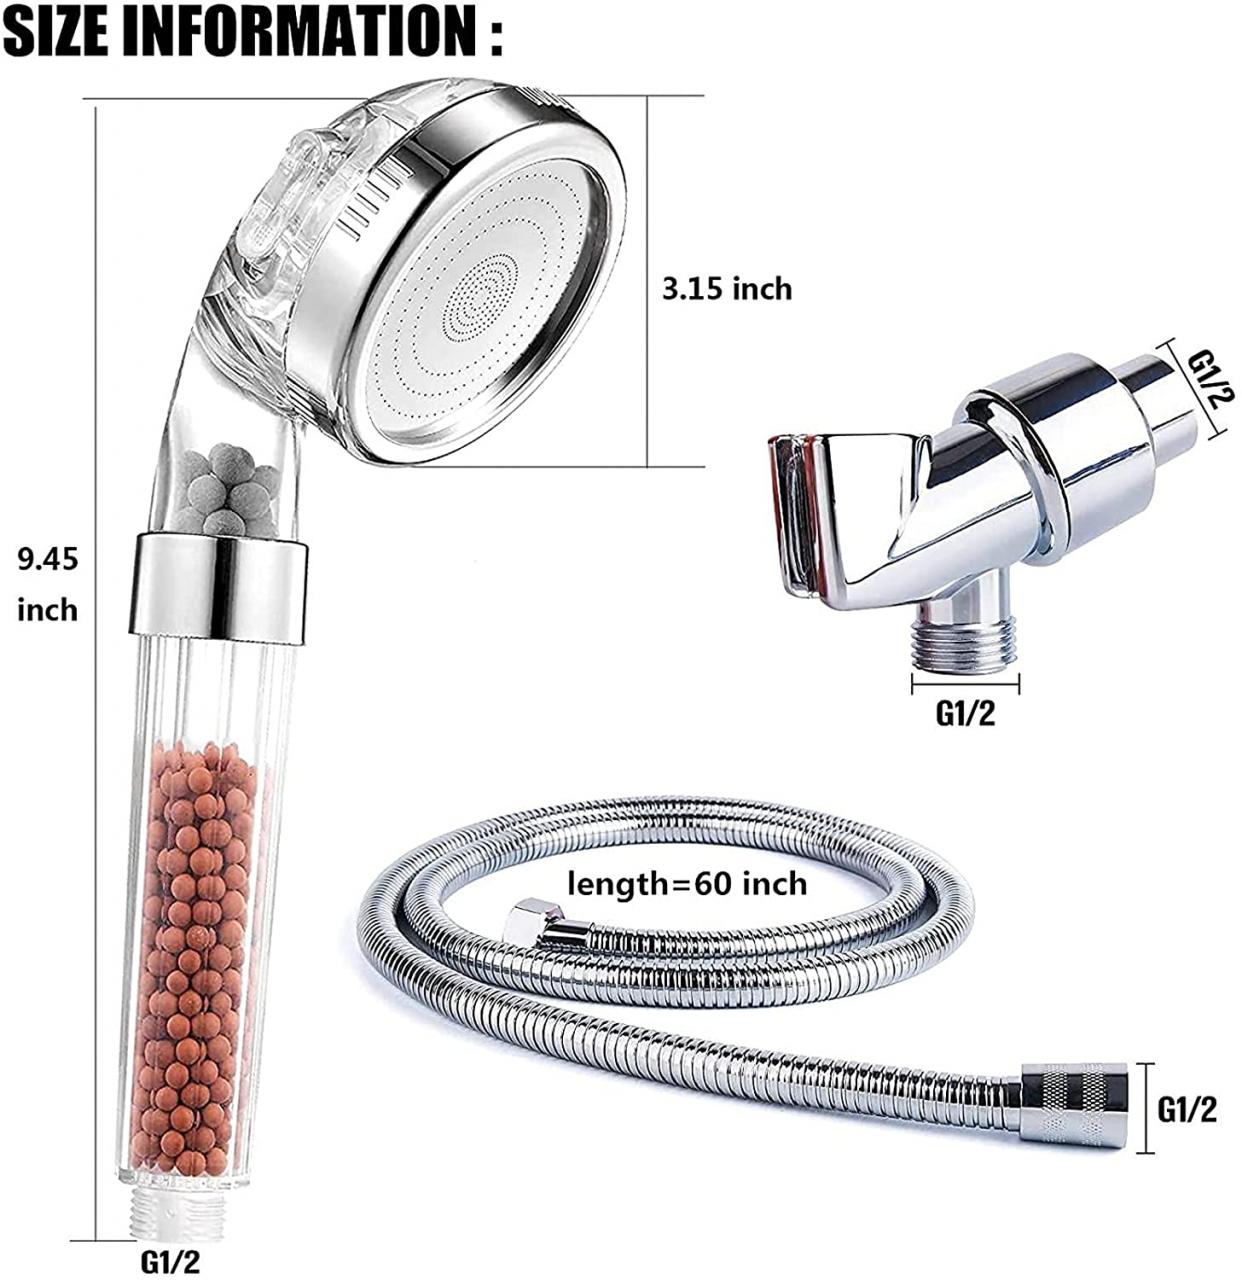 Ionic Shower Head Handheld Filter Shower Heads To Increase Pressure-3 Modes  For Hard Water Stop Button Design - Buy Ionic Shower Head Handheld,Water  Stop Button Shower Head,Increase Pressure-3 Modes Product on Alibaba.com